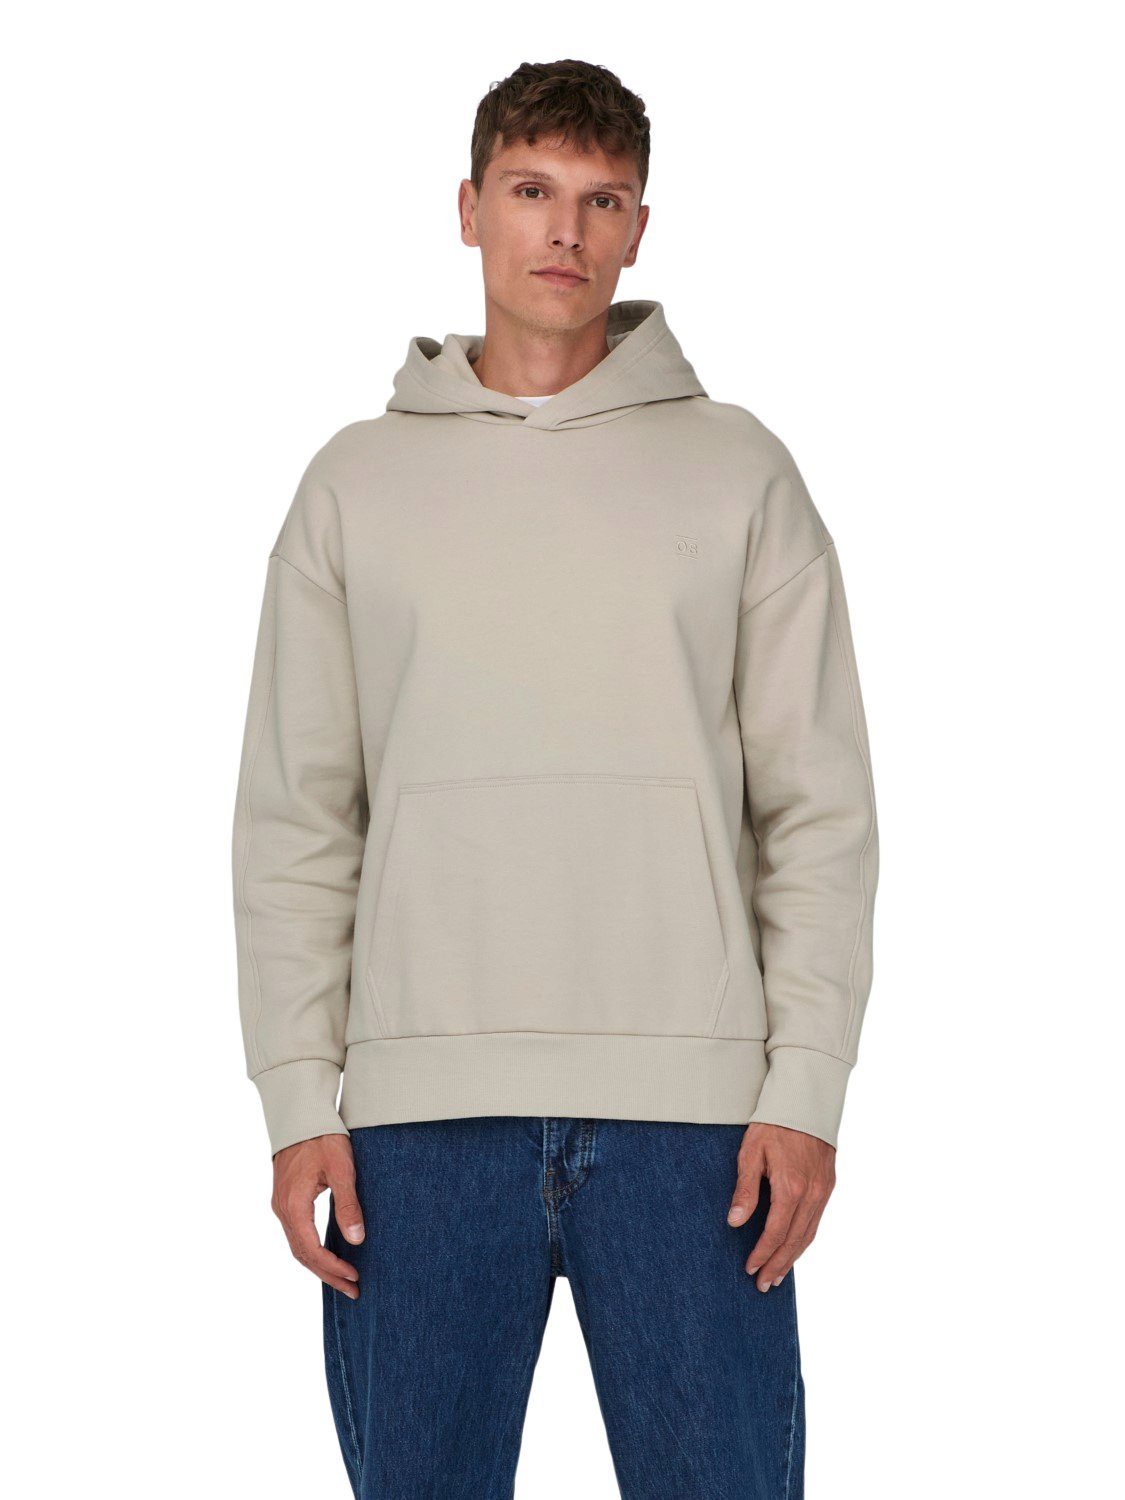 LIFE & ONLY Baumwolle 22026661 Hoodie ONSDAN aus Lining SONS Silver